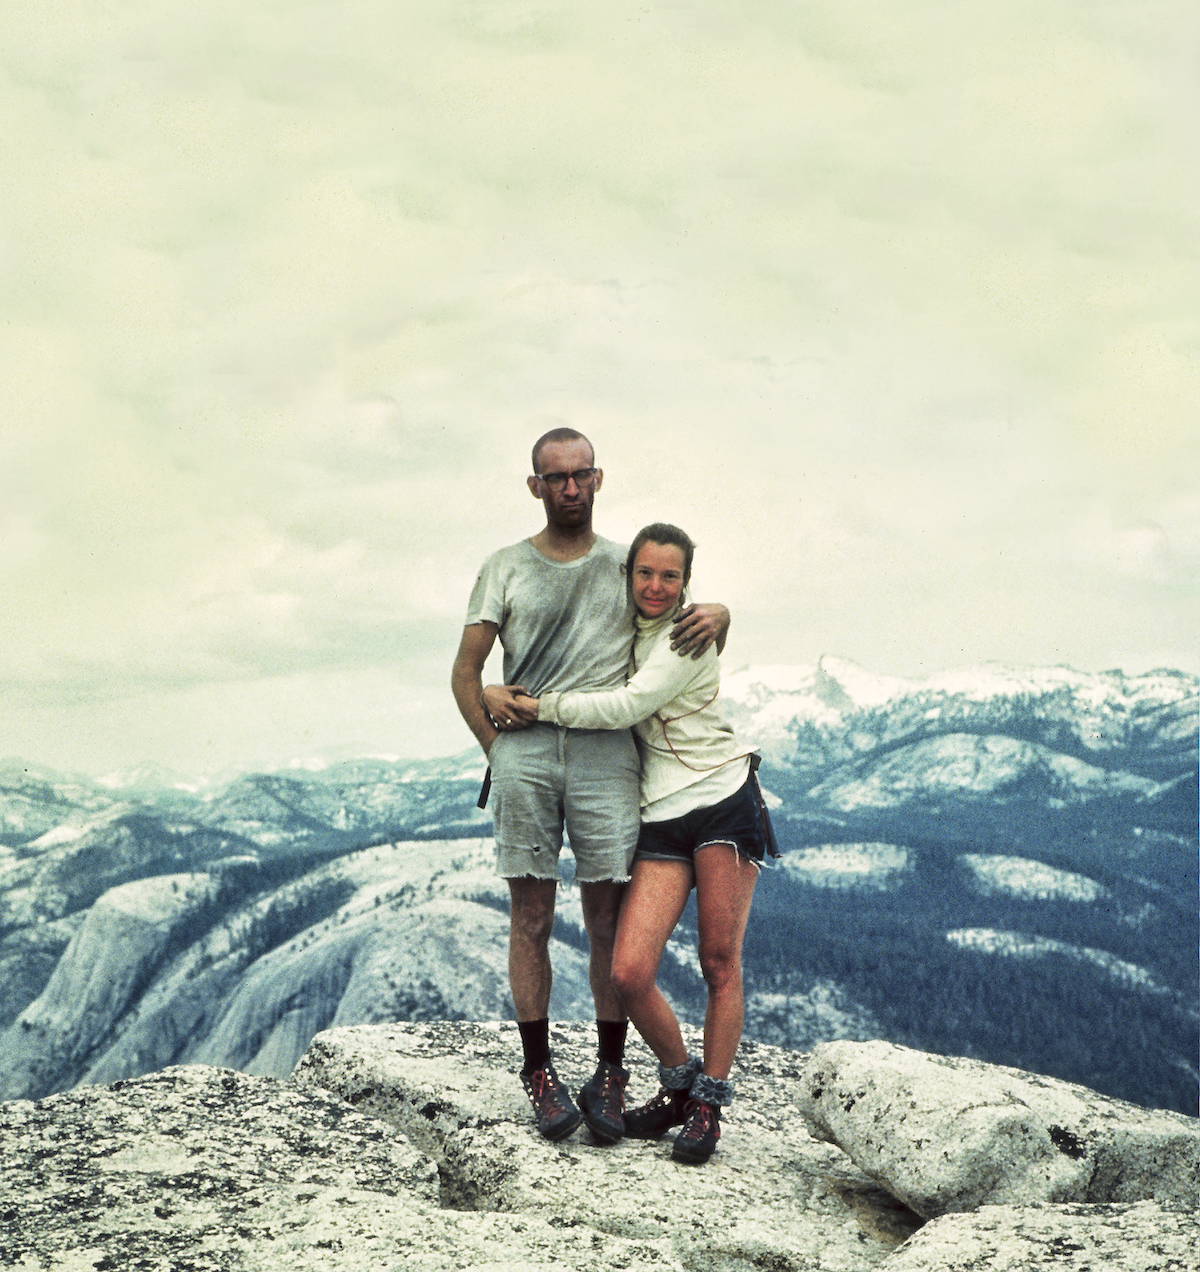 A portrait Royal and Liz Robbins at the top of a climb in Yosemite